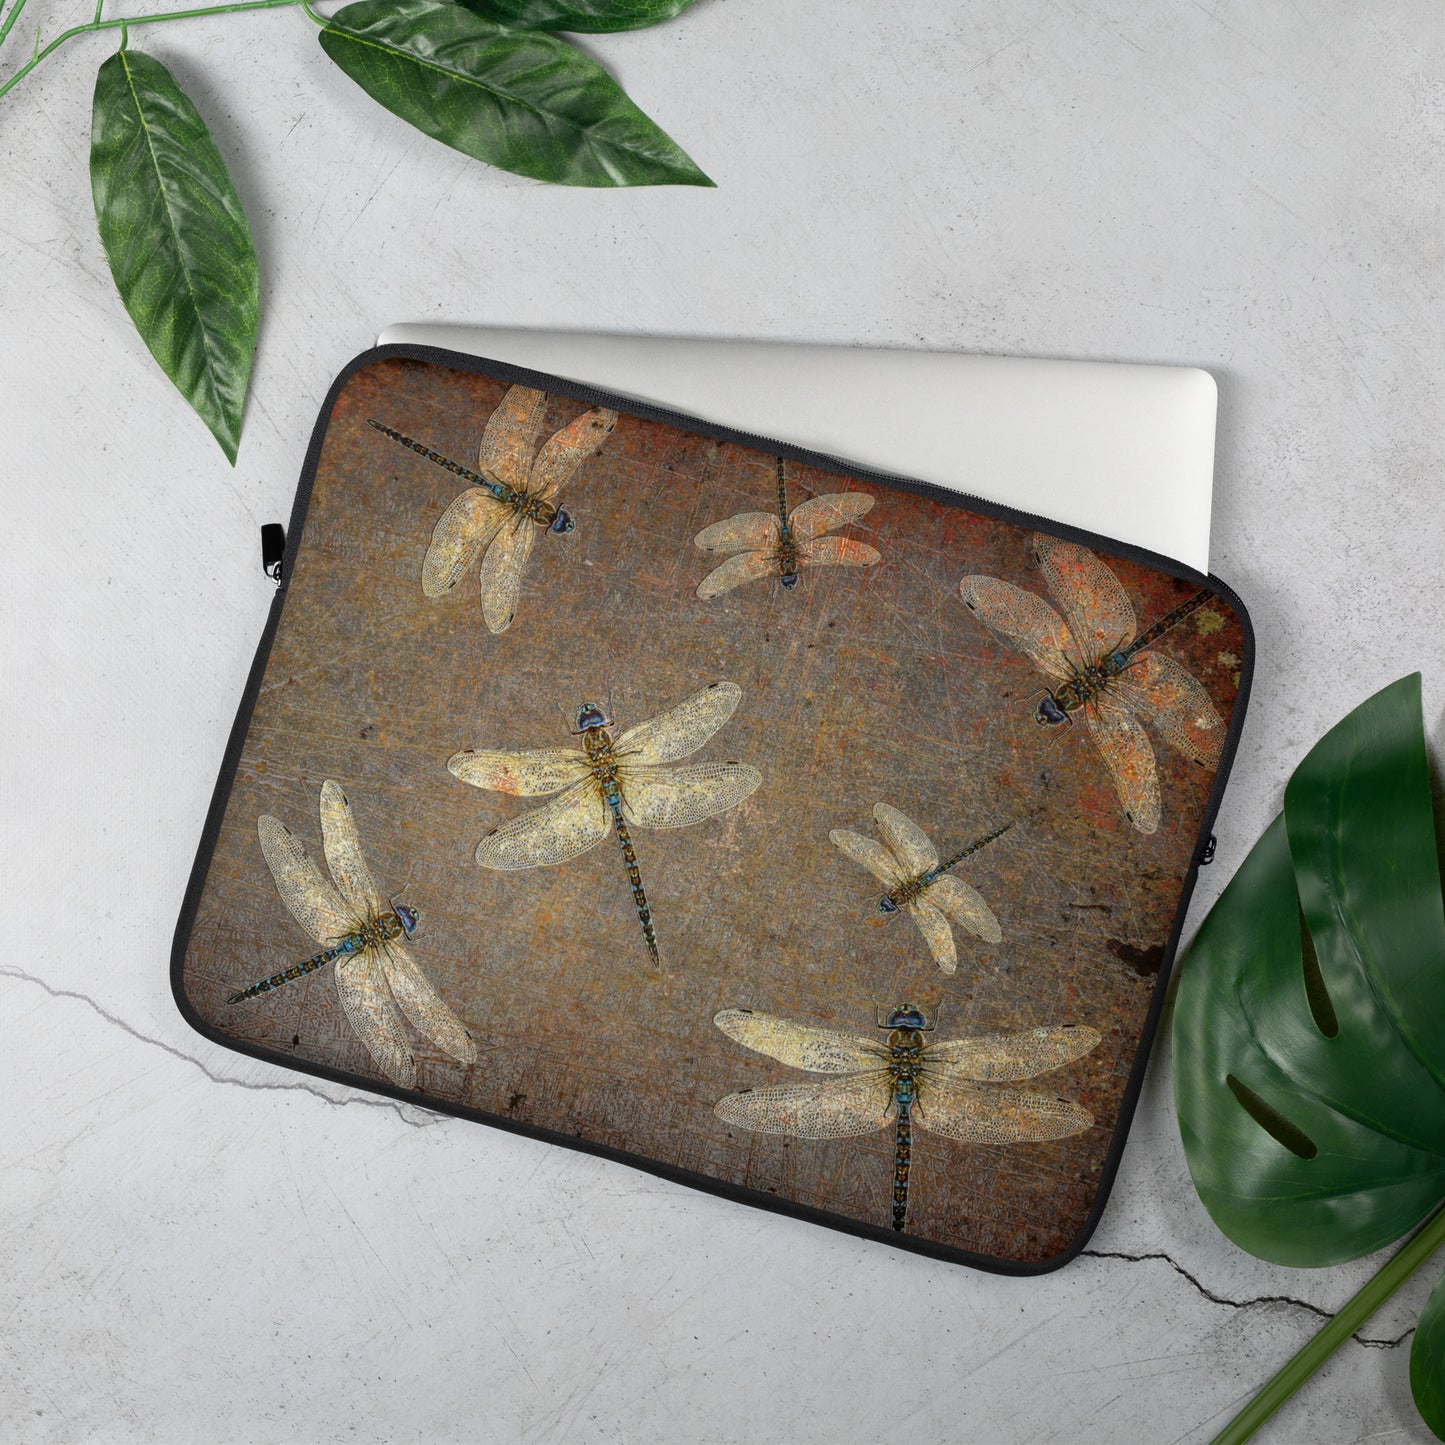 Swarm of Dragonflies on Distressed Background Laptop, Surface or MacBook Neoprene Sleeve 15 inches